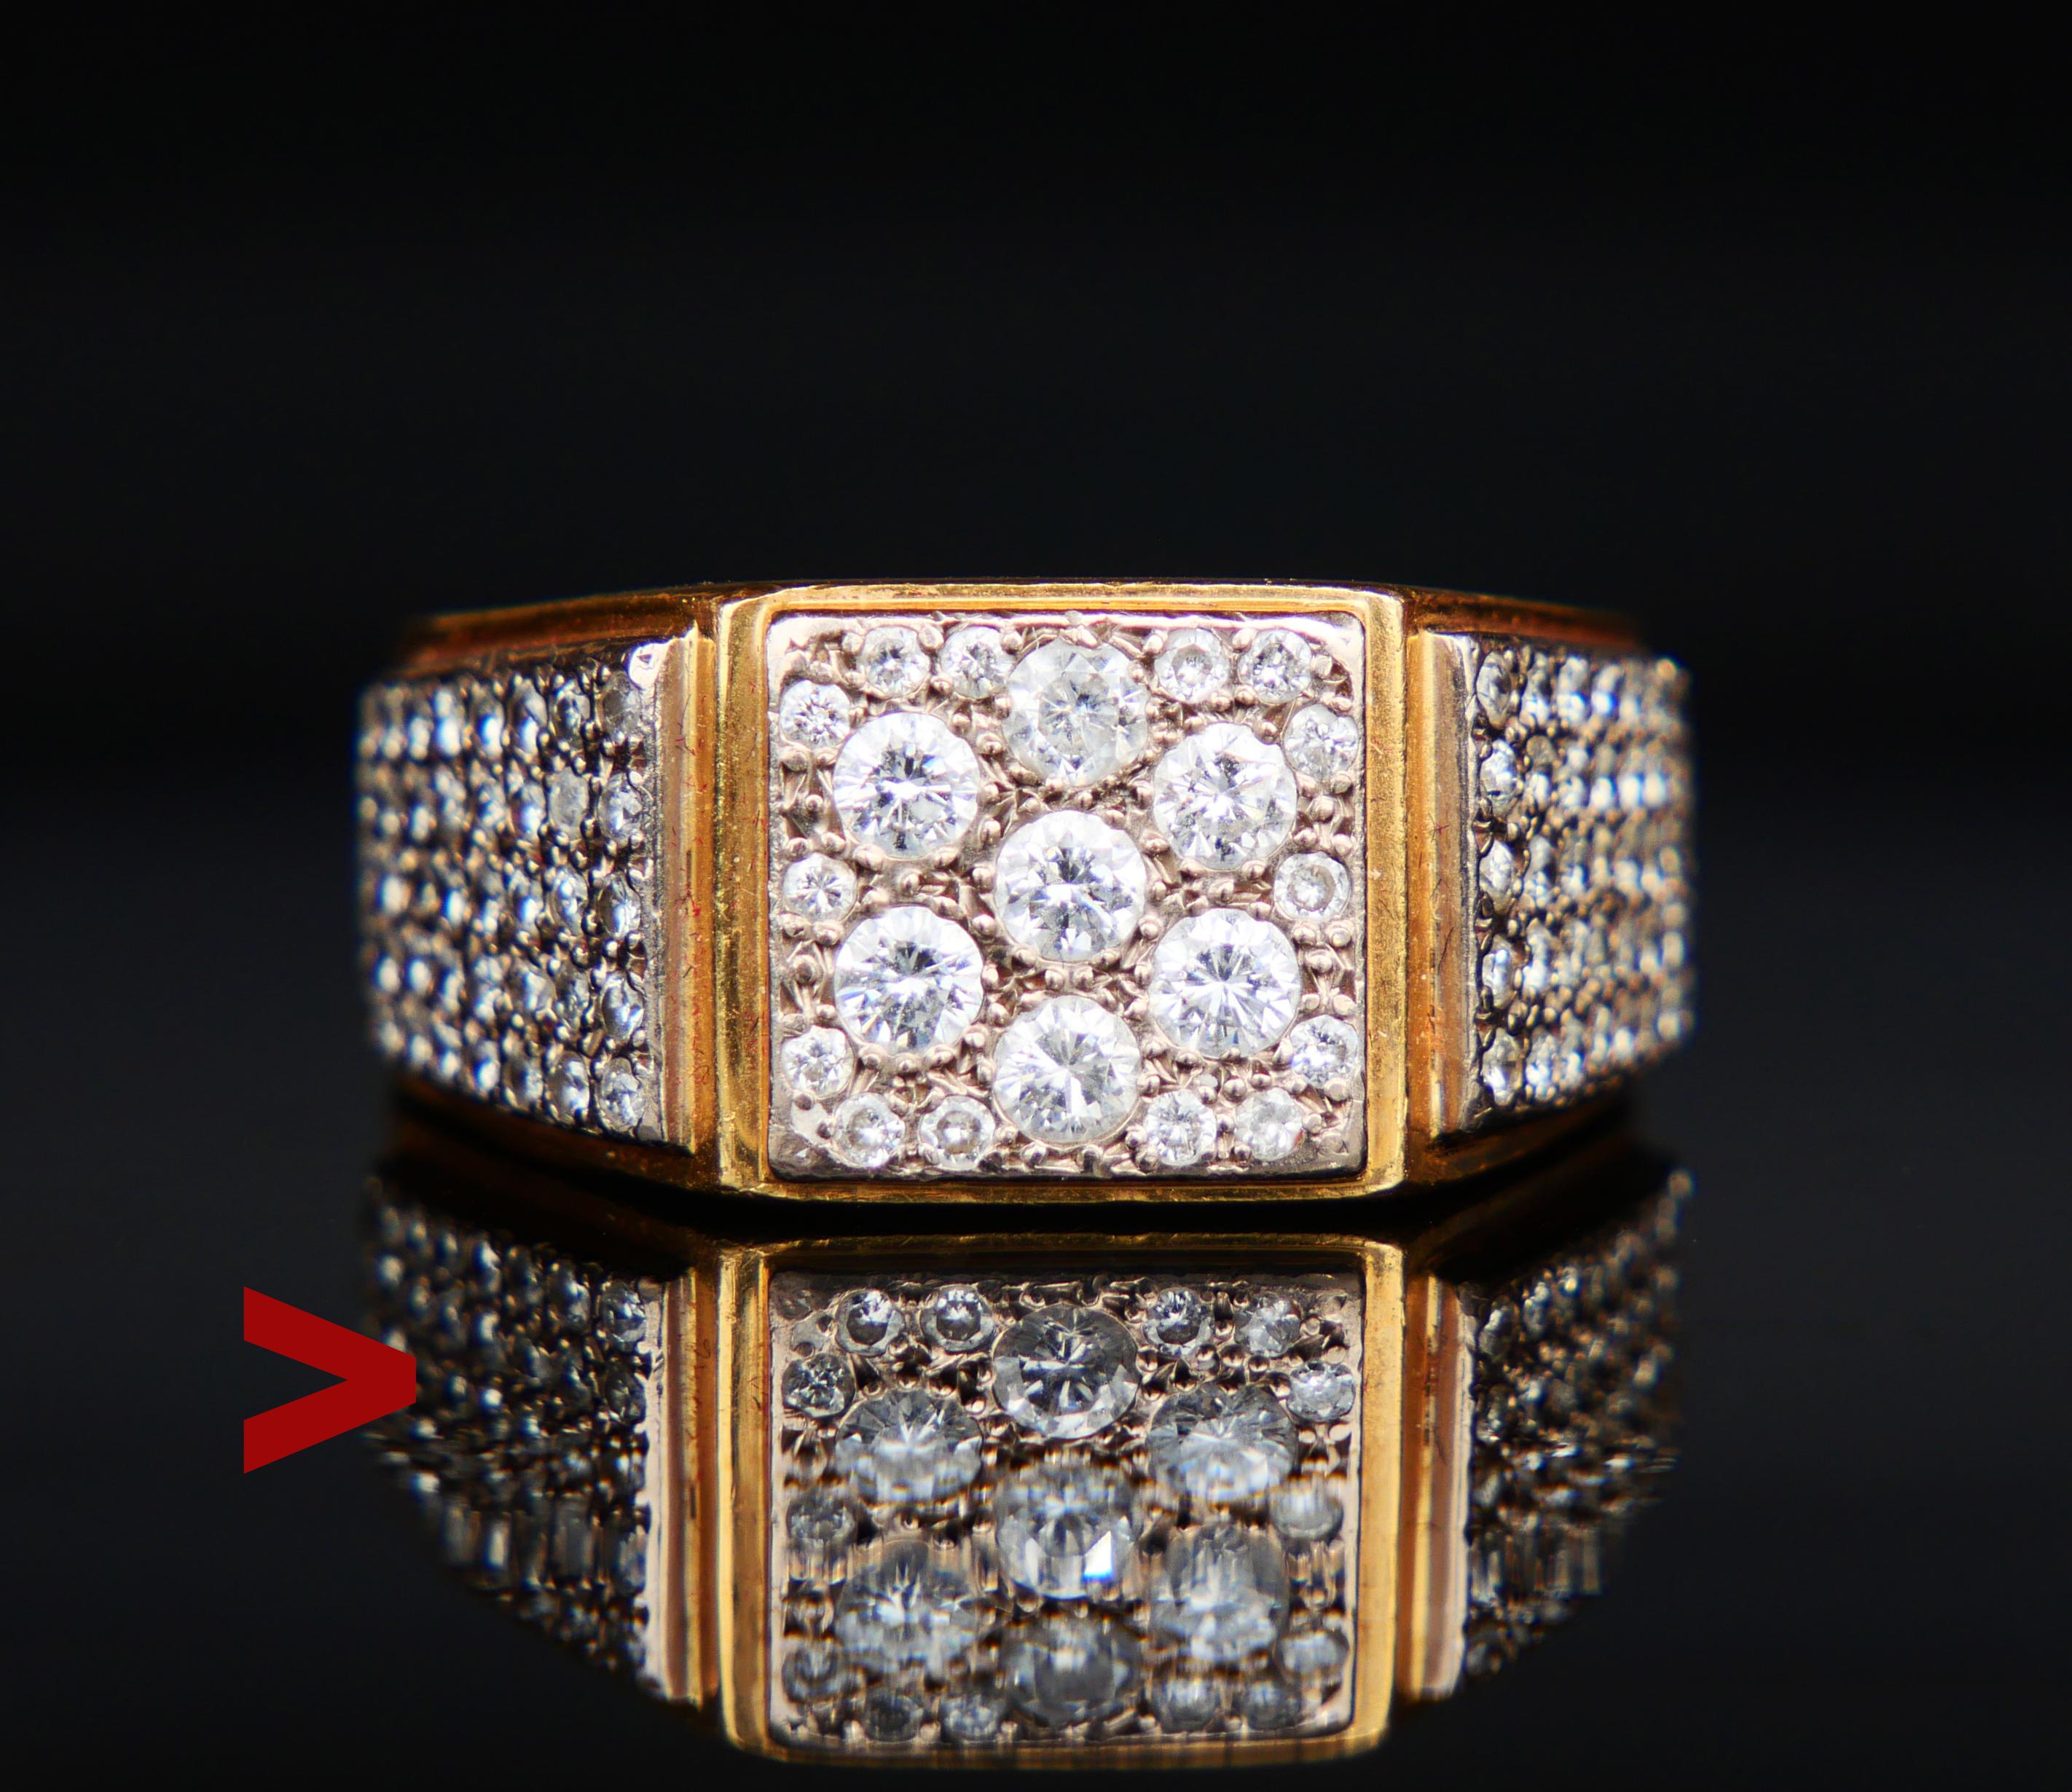 Luxurious and Massive Antique or Vintage Men's Ring in solid 18K Yellow Gold with 101 diamond cut Diamonds pave set into Platinum / or white Gold clusters.

Seven larger Diamonds' Ø 3mm / 0.11 ct each; 94 ca 1.3mm/0.01ct each.

Total weight of the